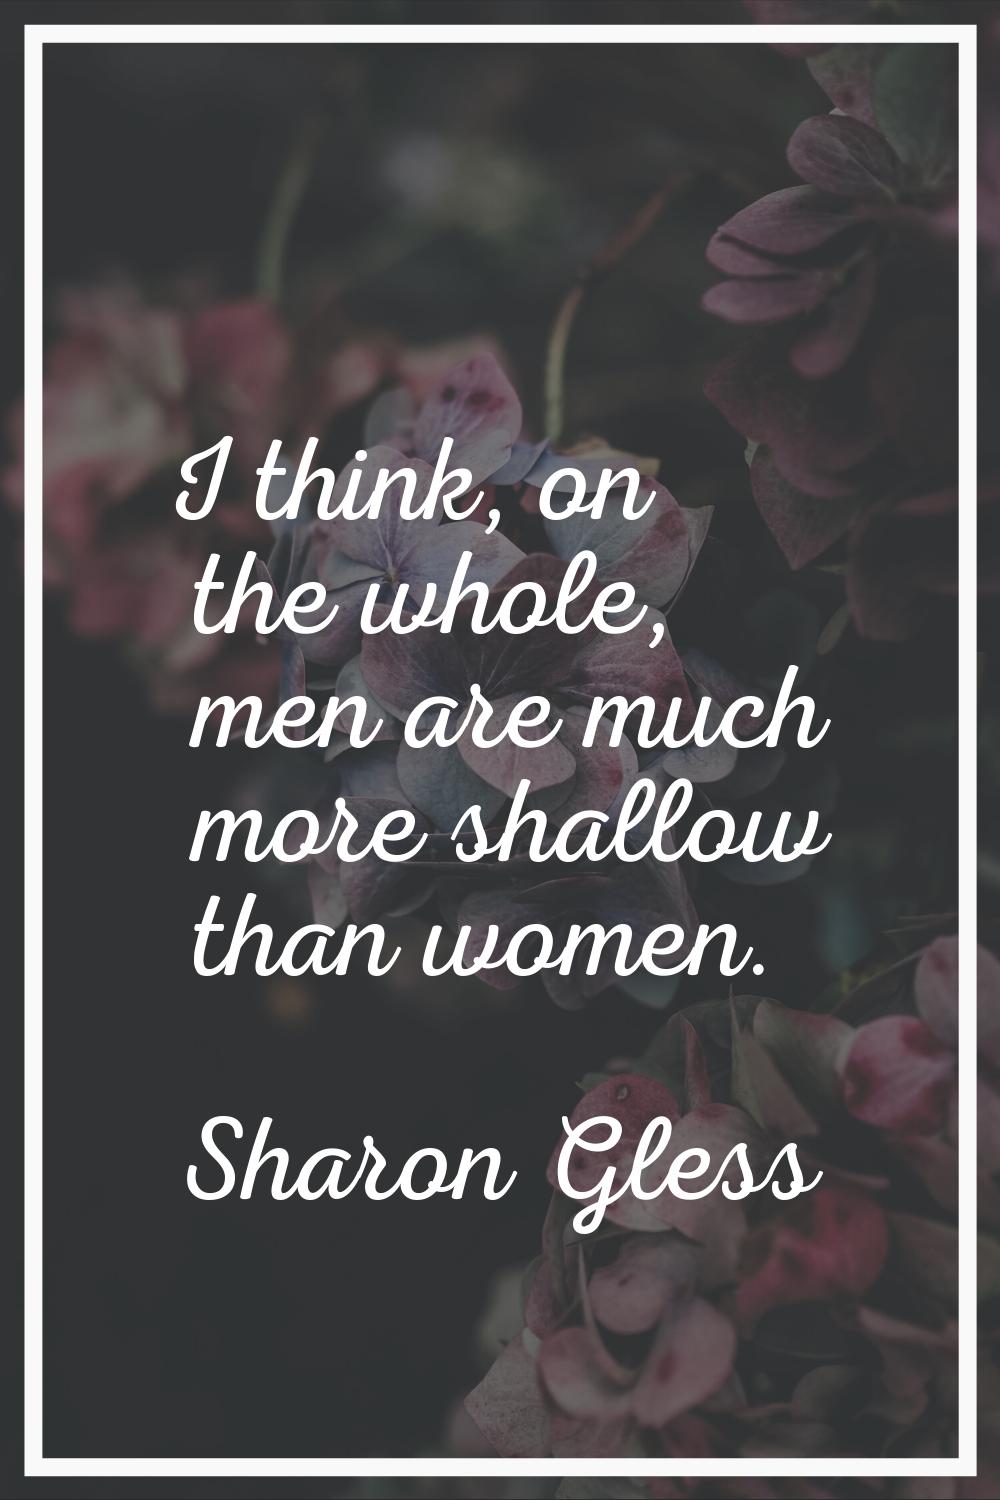 I think, on the whole, men are much more shallow than women.